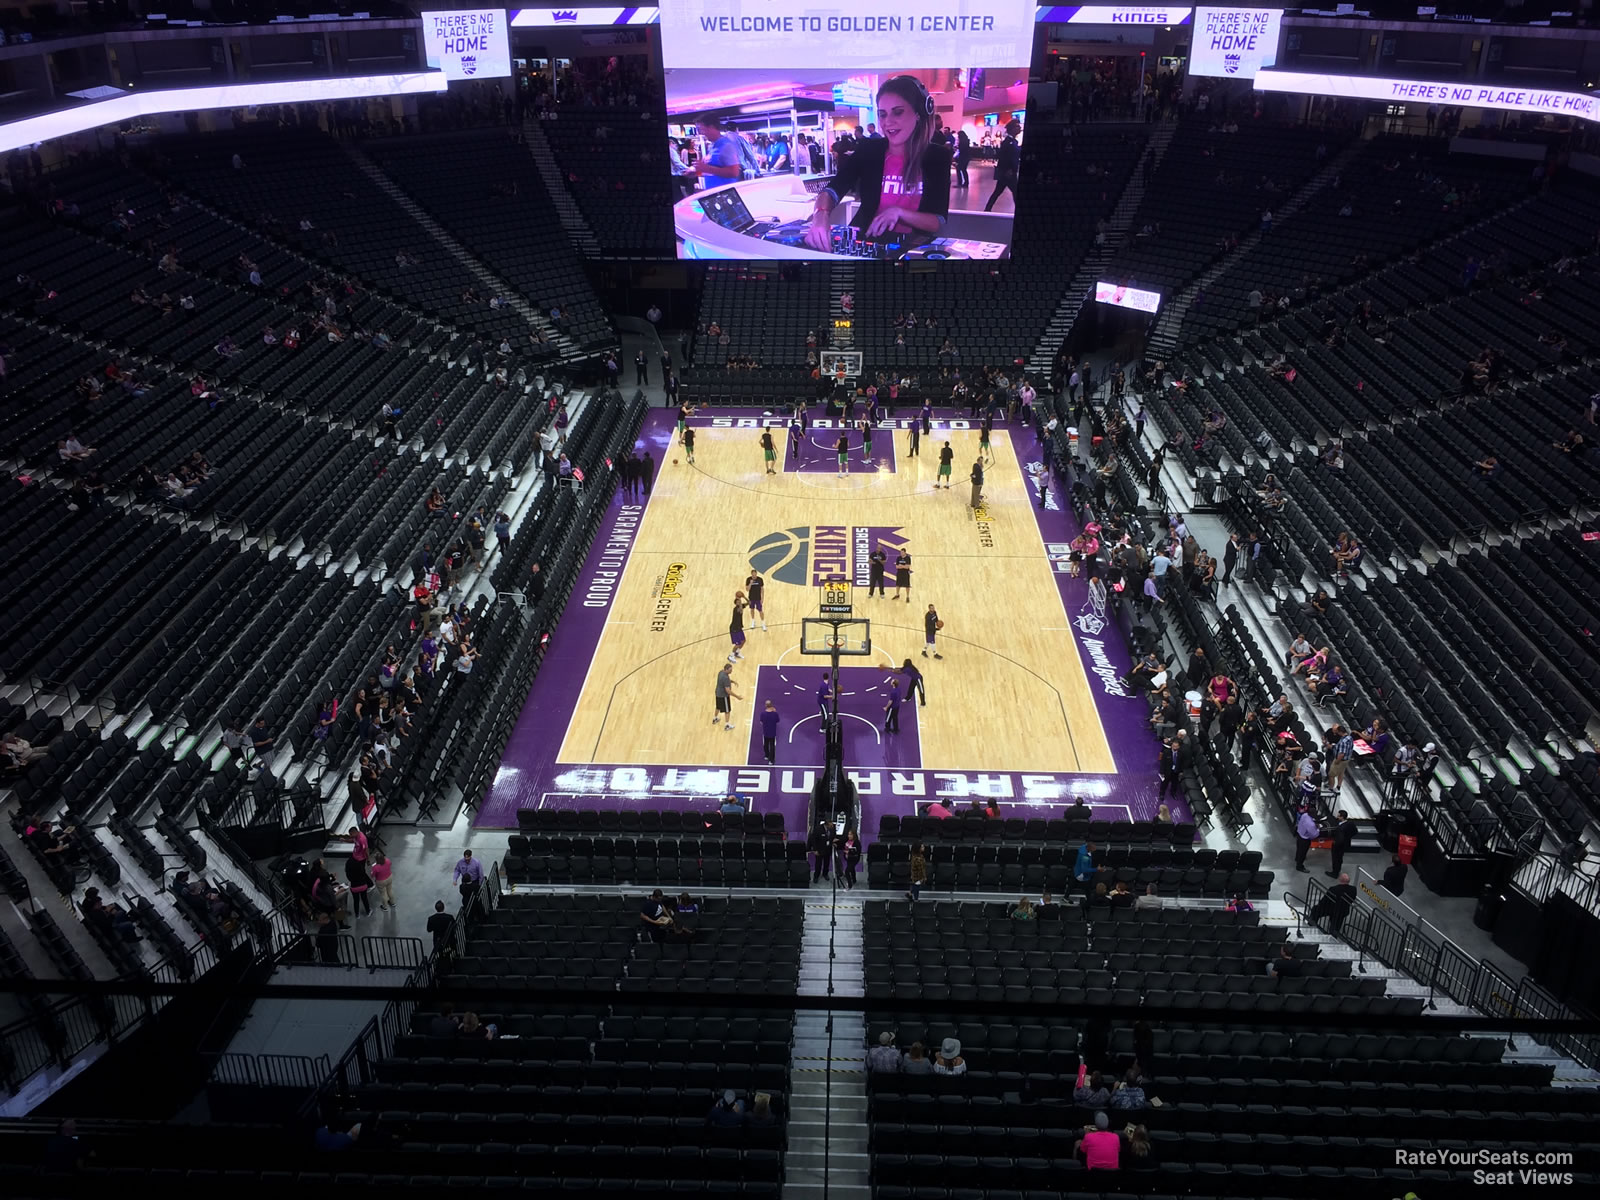 section 211, row a seat view  for basketball - golden 1 center